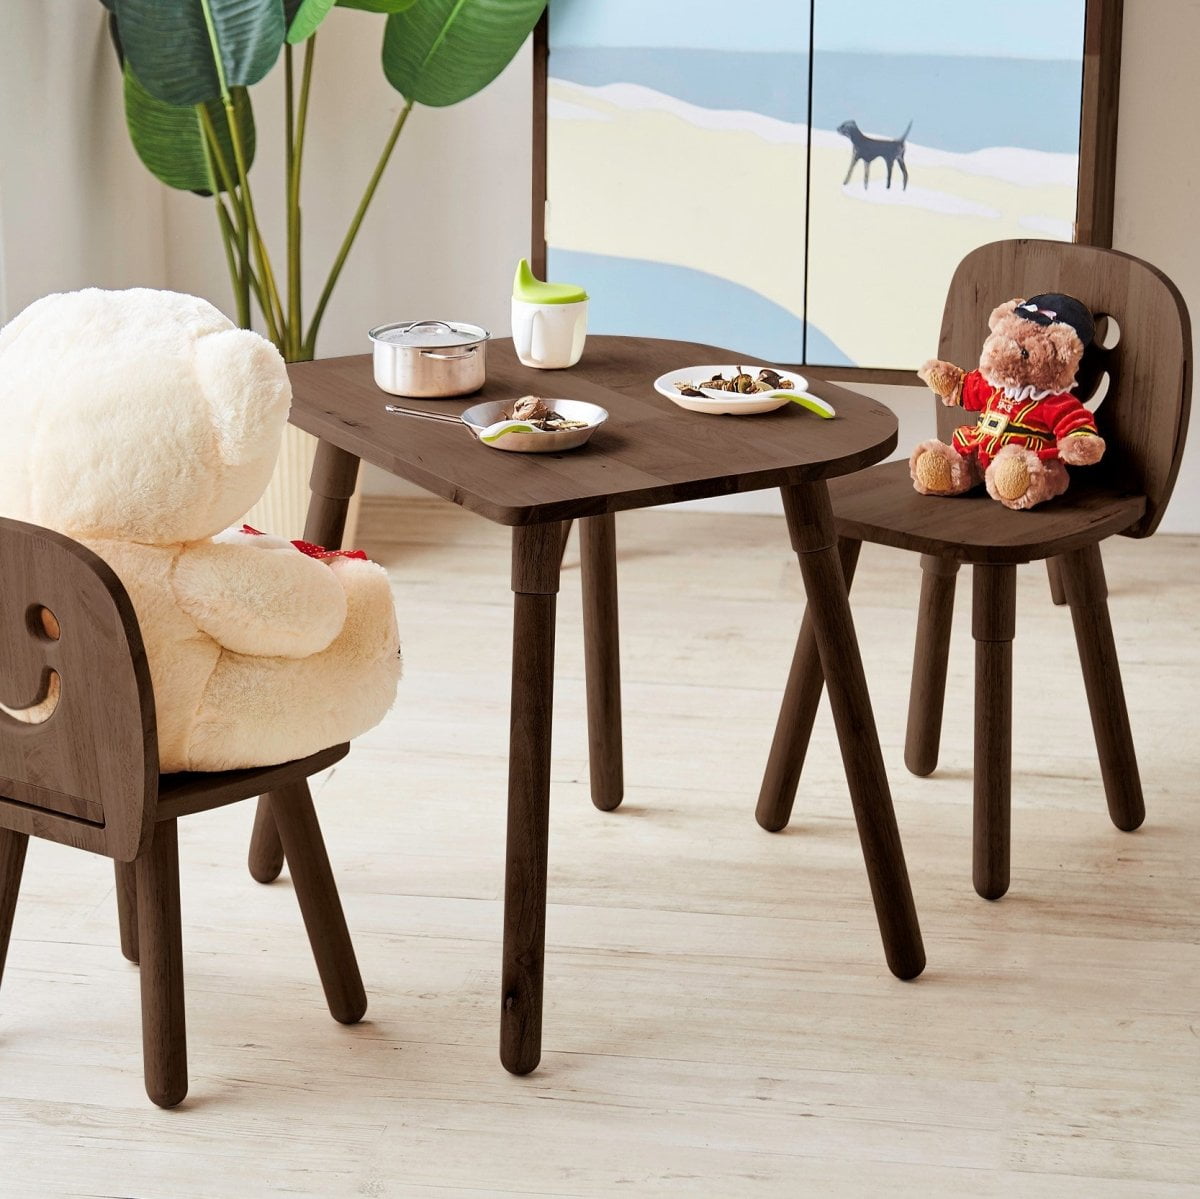 Smiley Solid Wood Kids Table Col: Walnut (WIL-6521T) picket and rail